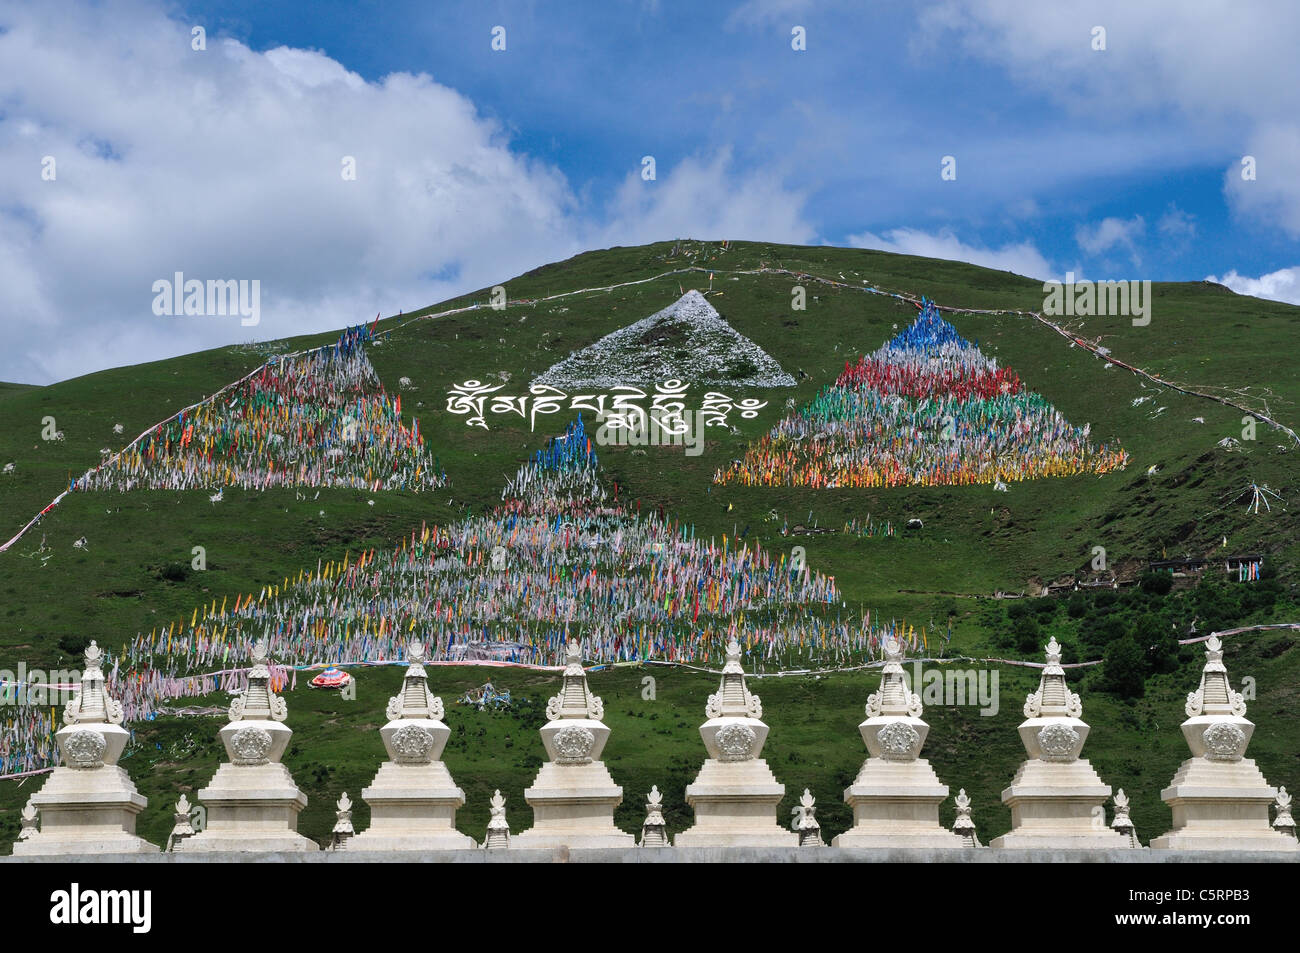 Tibetan prayer flags cover side of a hill. Tagong, Sichuan, China. Stock Photo